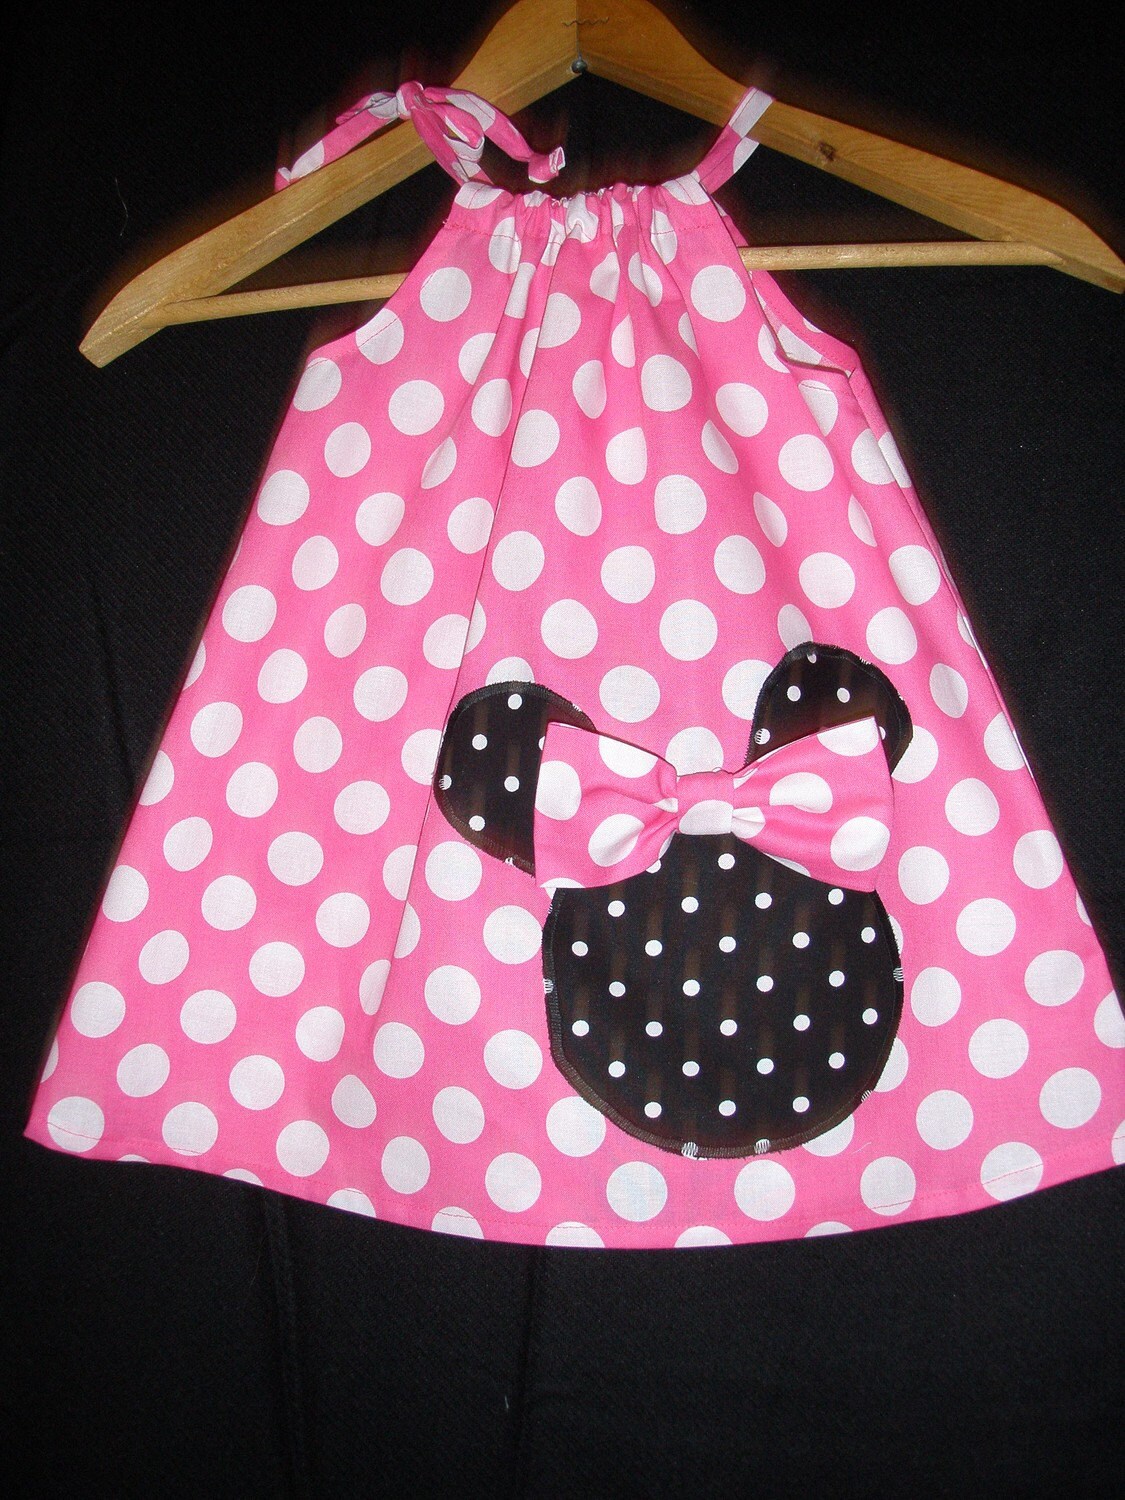 Minnie Mouse pink polka dot Swing dress with matching doll